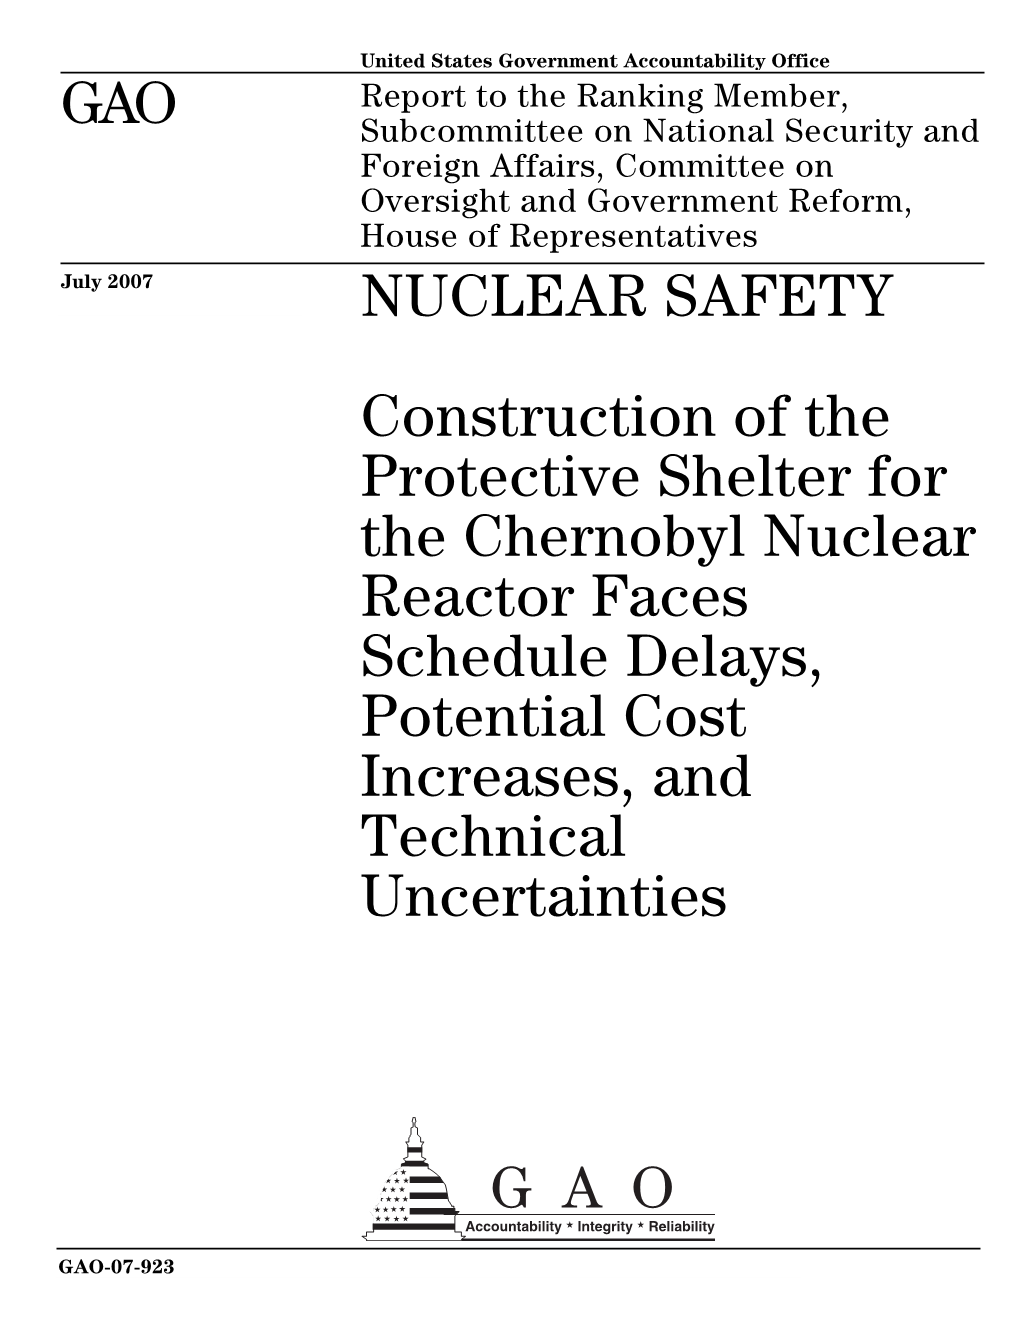 Construction of the Protective Shelter for the Chernobyl Nuclear Reactor Faces Schedule Delays, Potential Cost Increases, and Technical Uncertainties